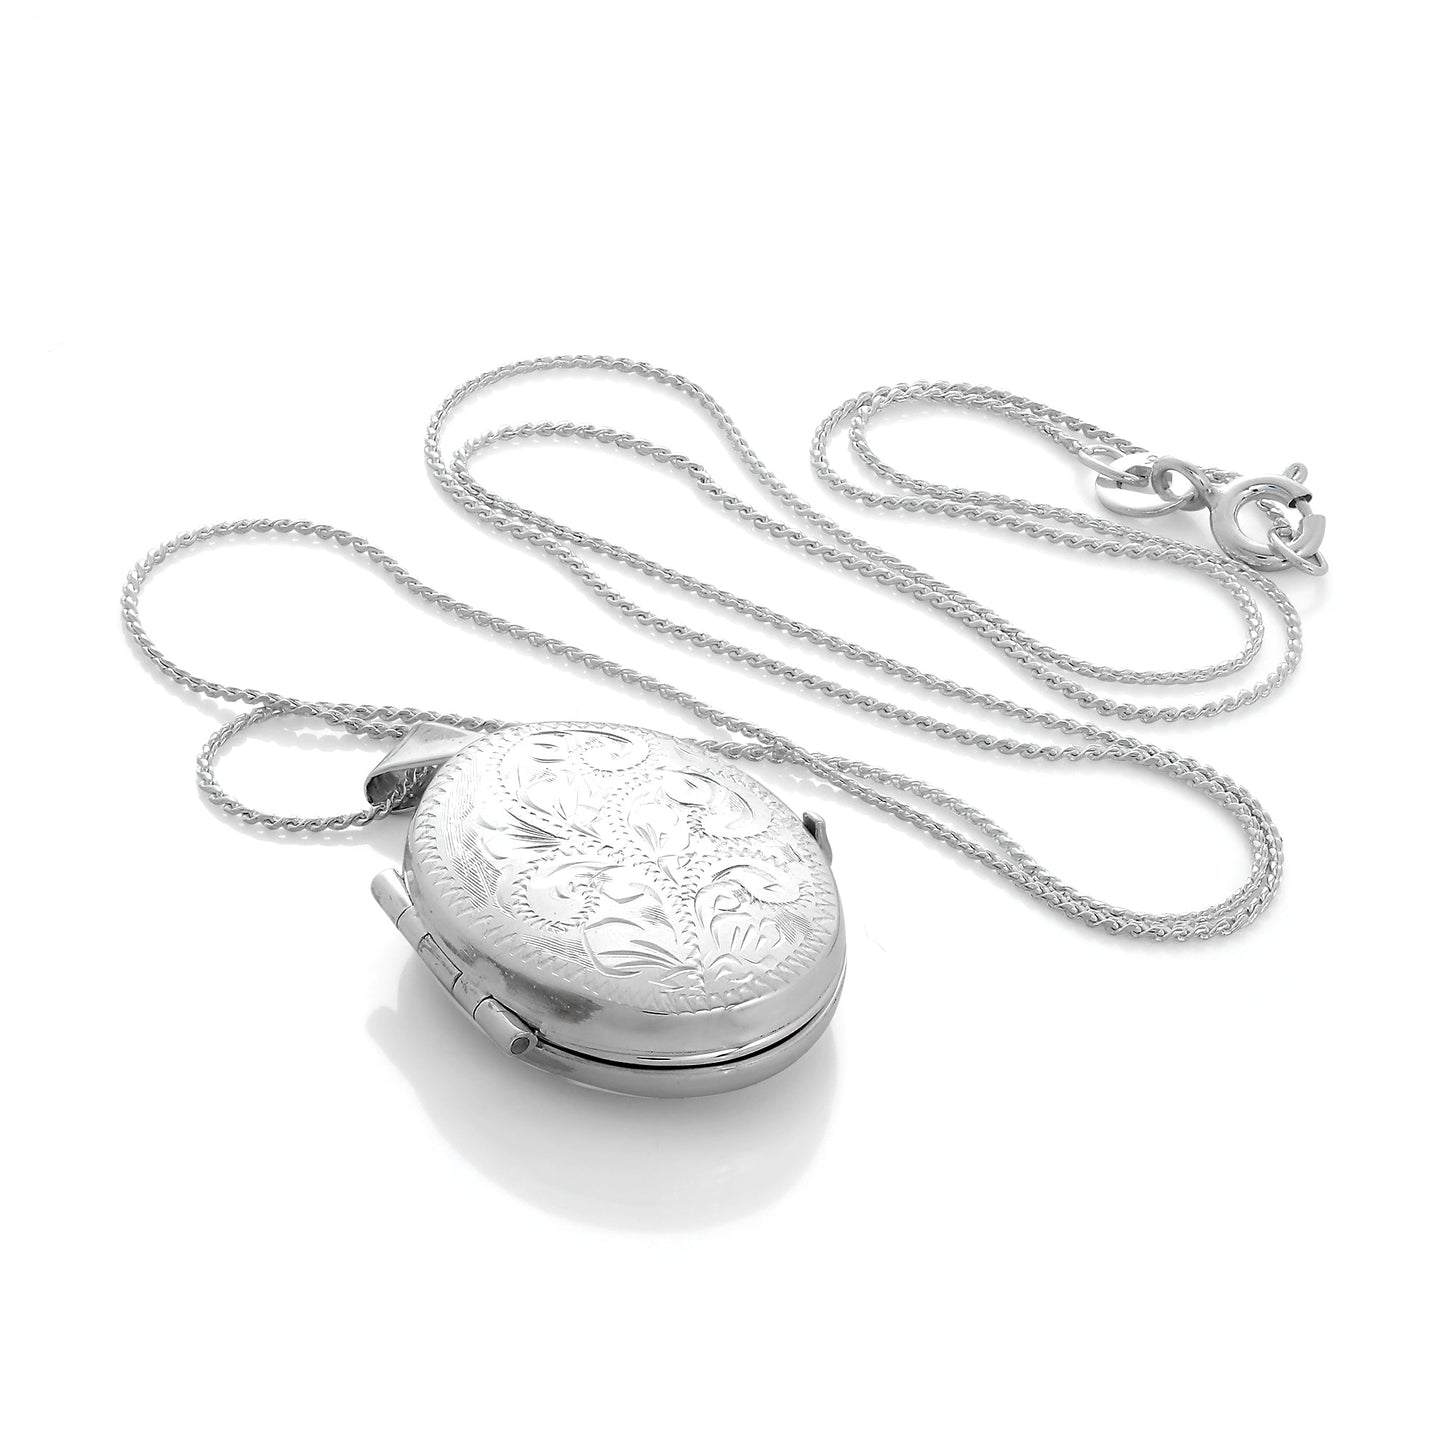 Sterling Silver Engraved Oval 4 Photo Family Locket on Chain